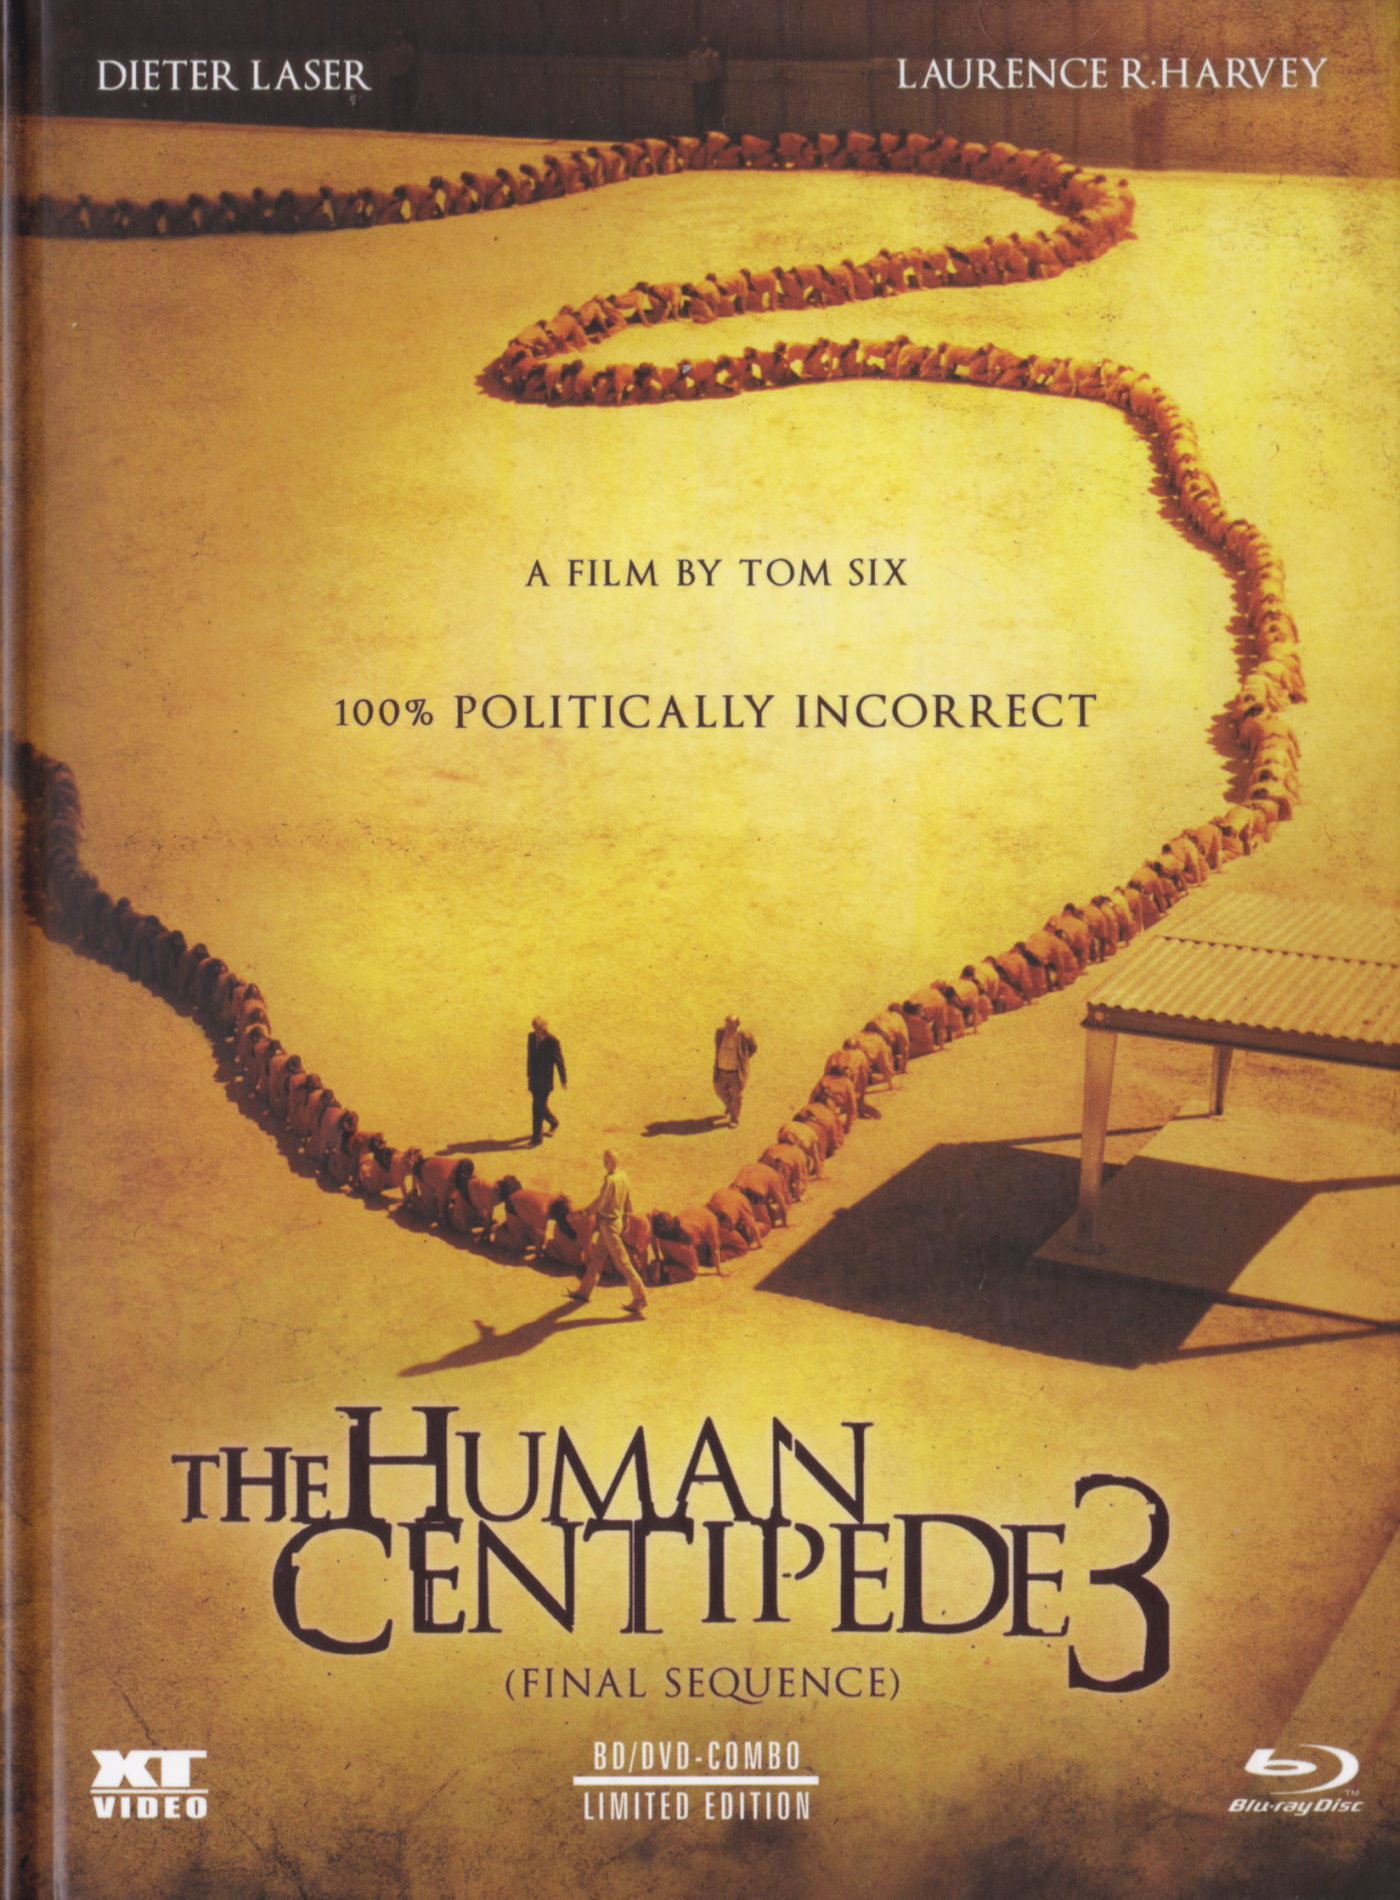 Cover - The Human Centipede 3 (Final Sequence).jpg